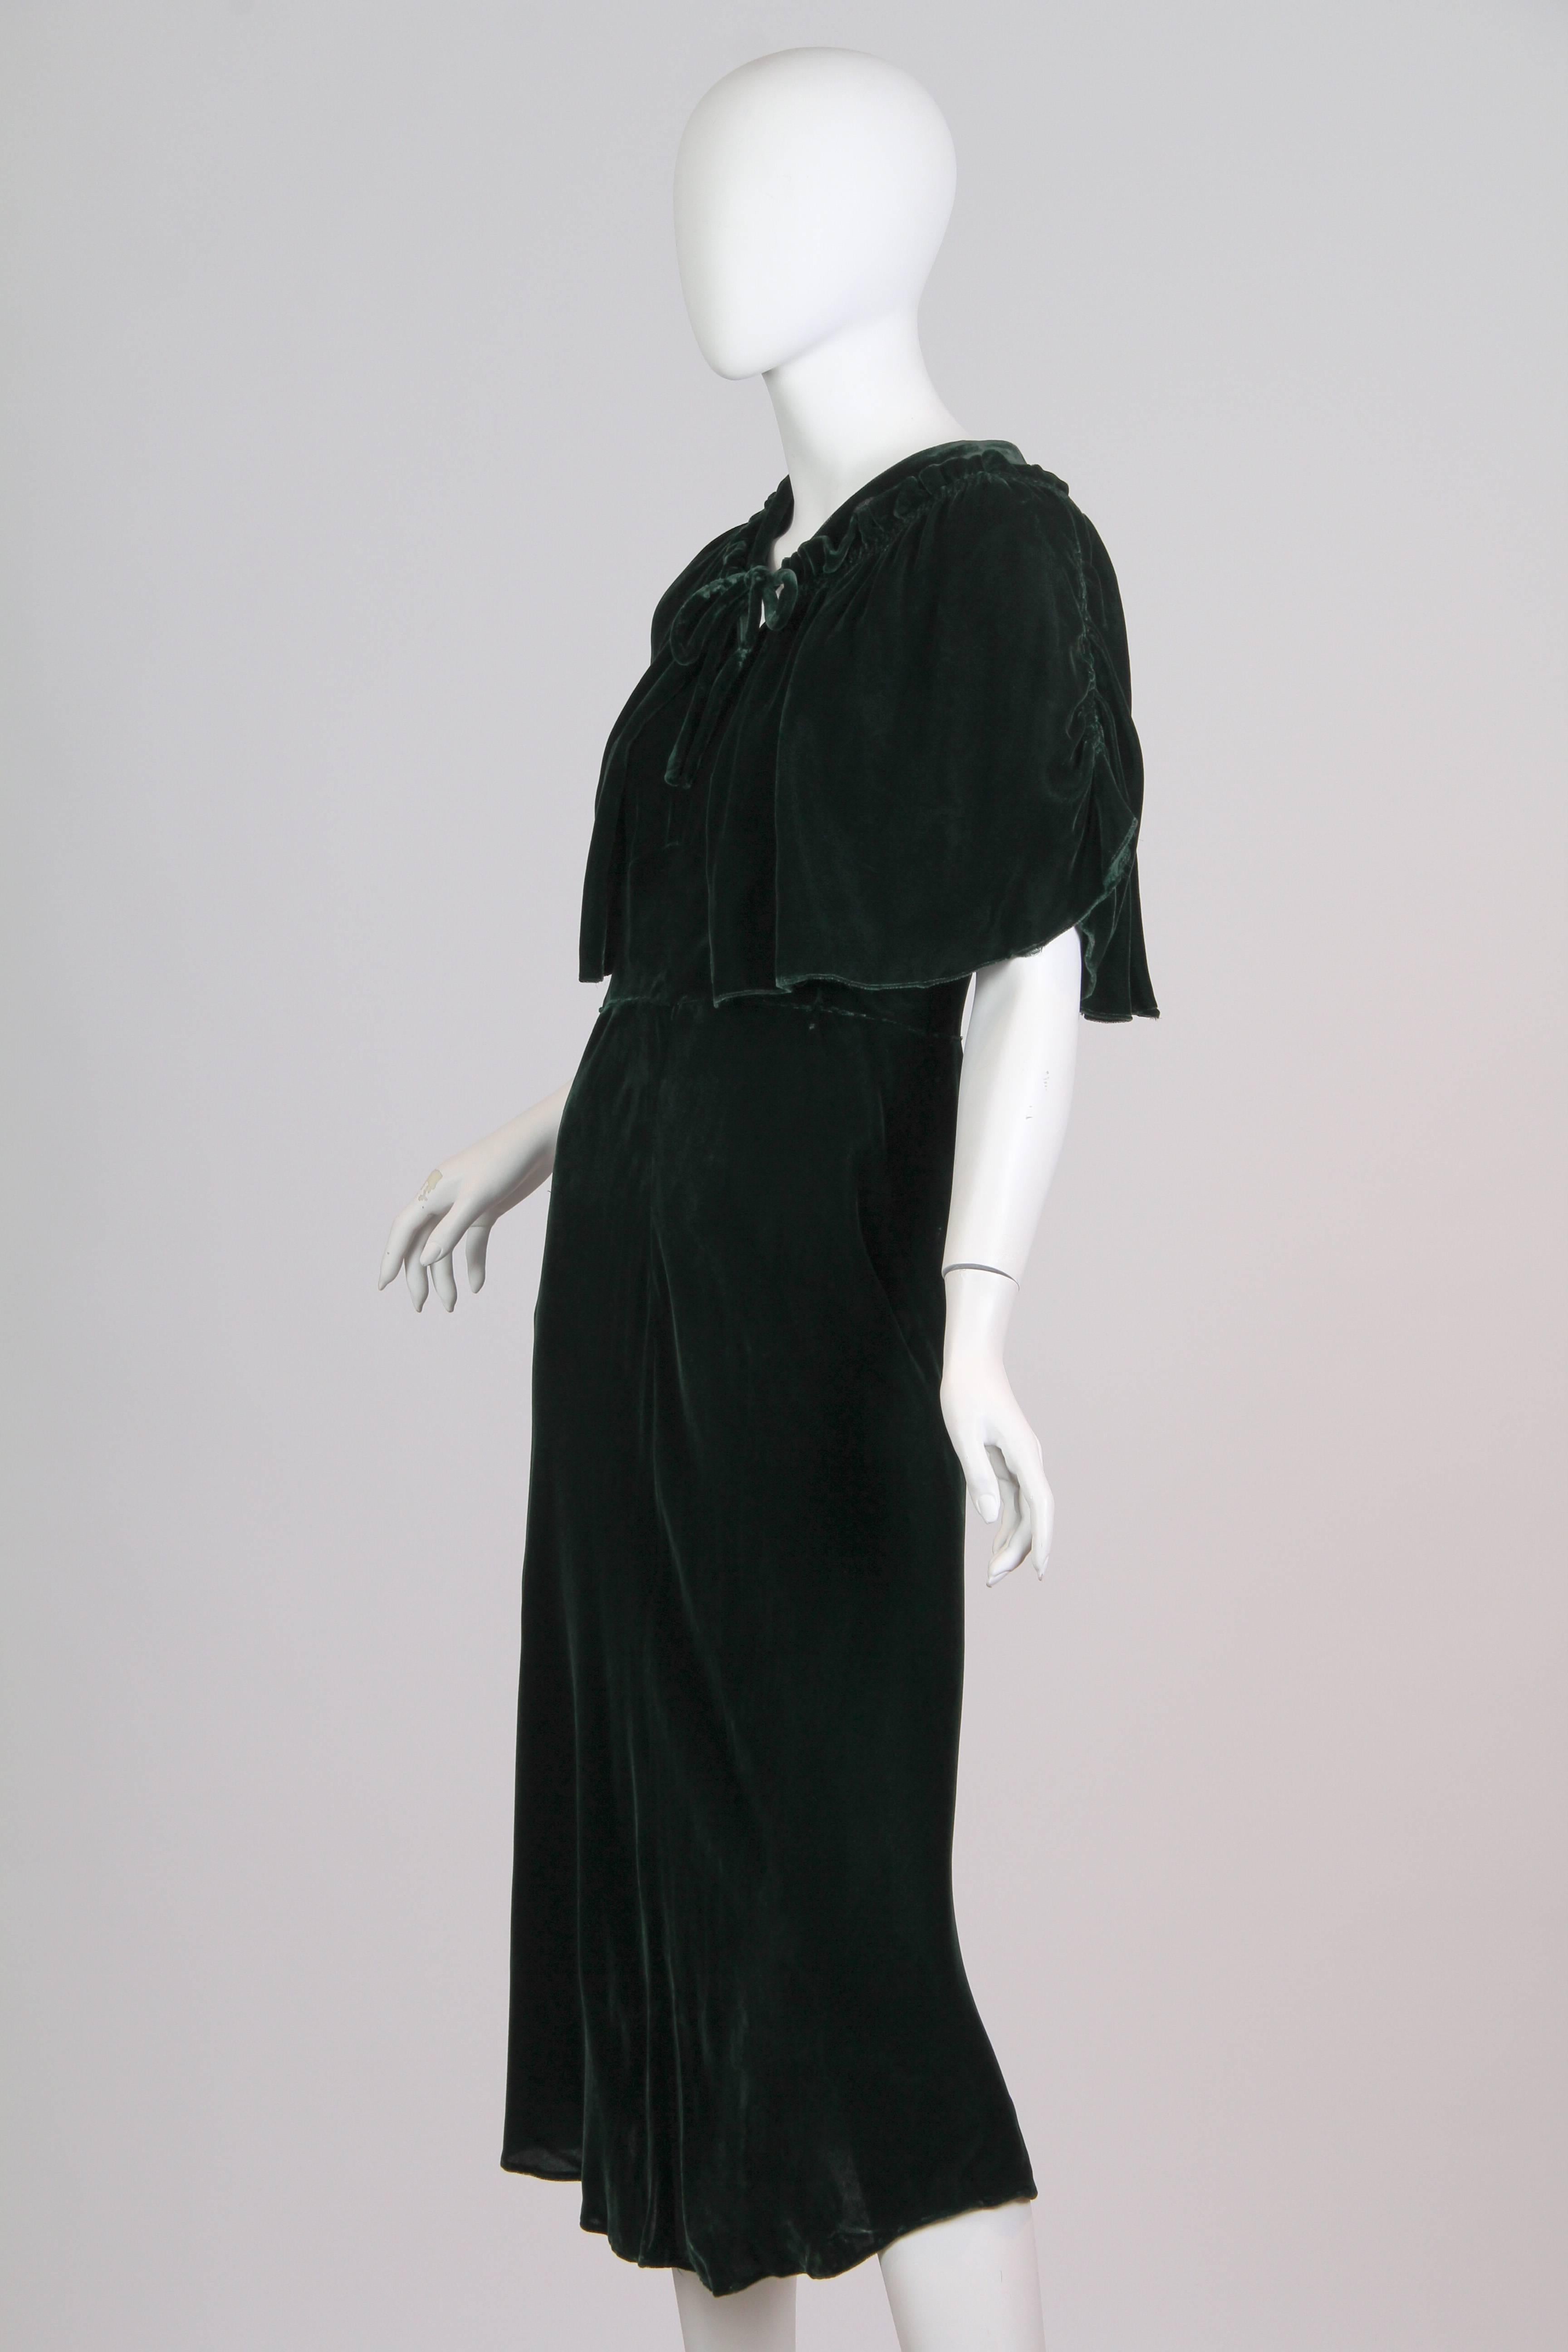 1930s Emerald Green Silk Velvet Dress cut on the bias with lovely cape like sleeves. Dress can also be worn front to back as it is cut trim and on the bias.